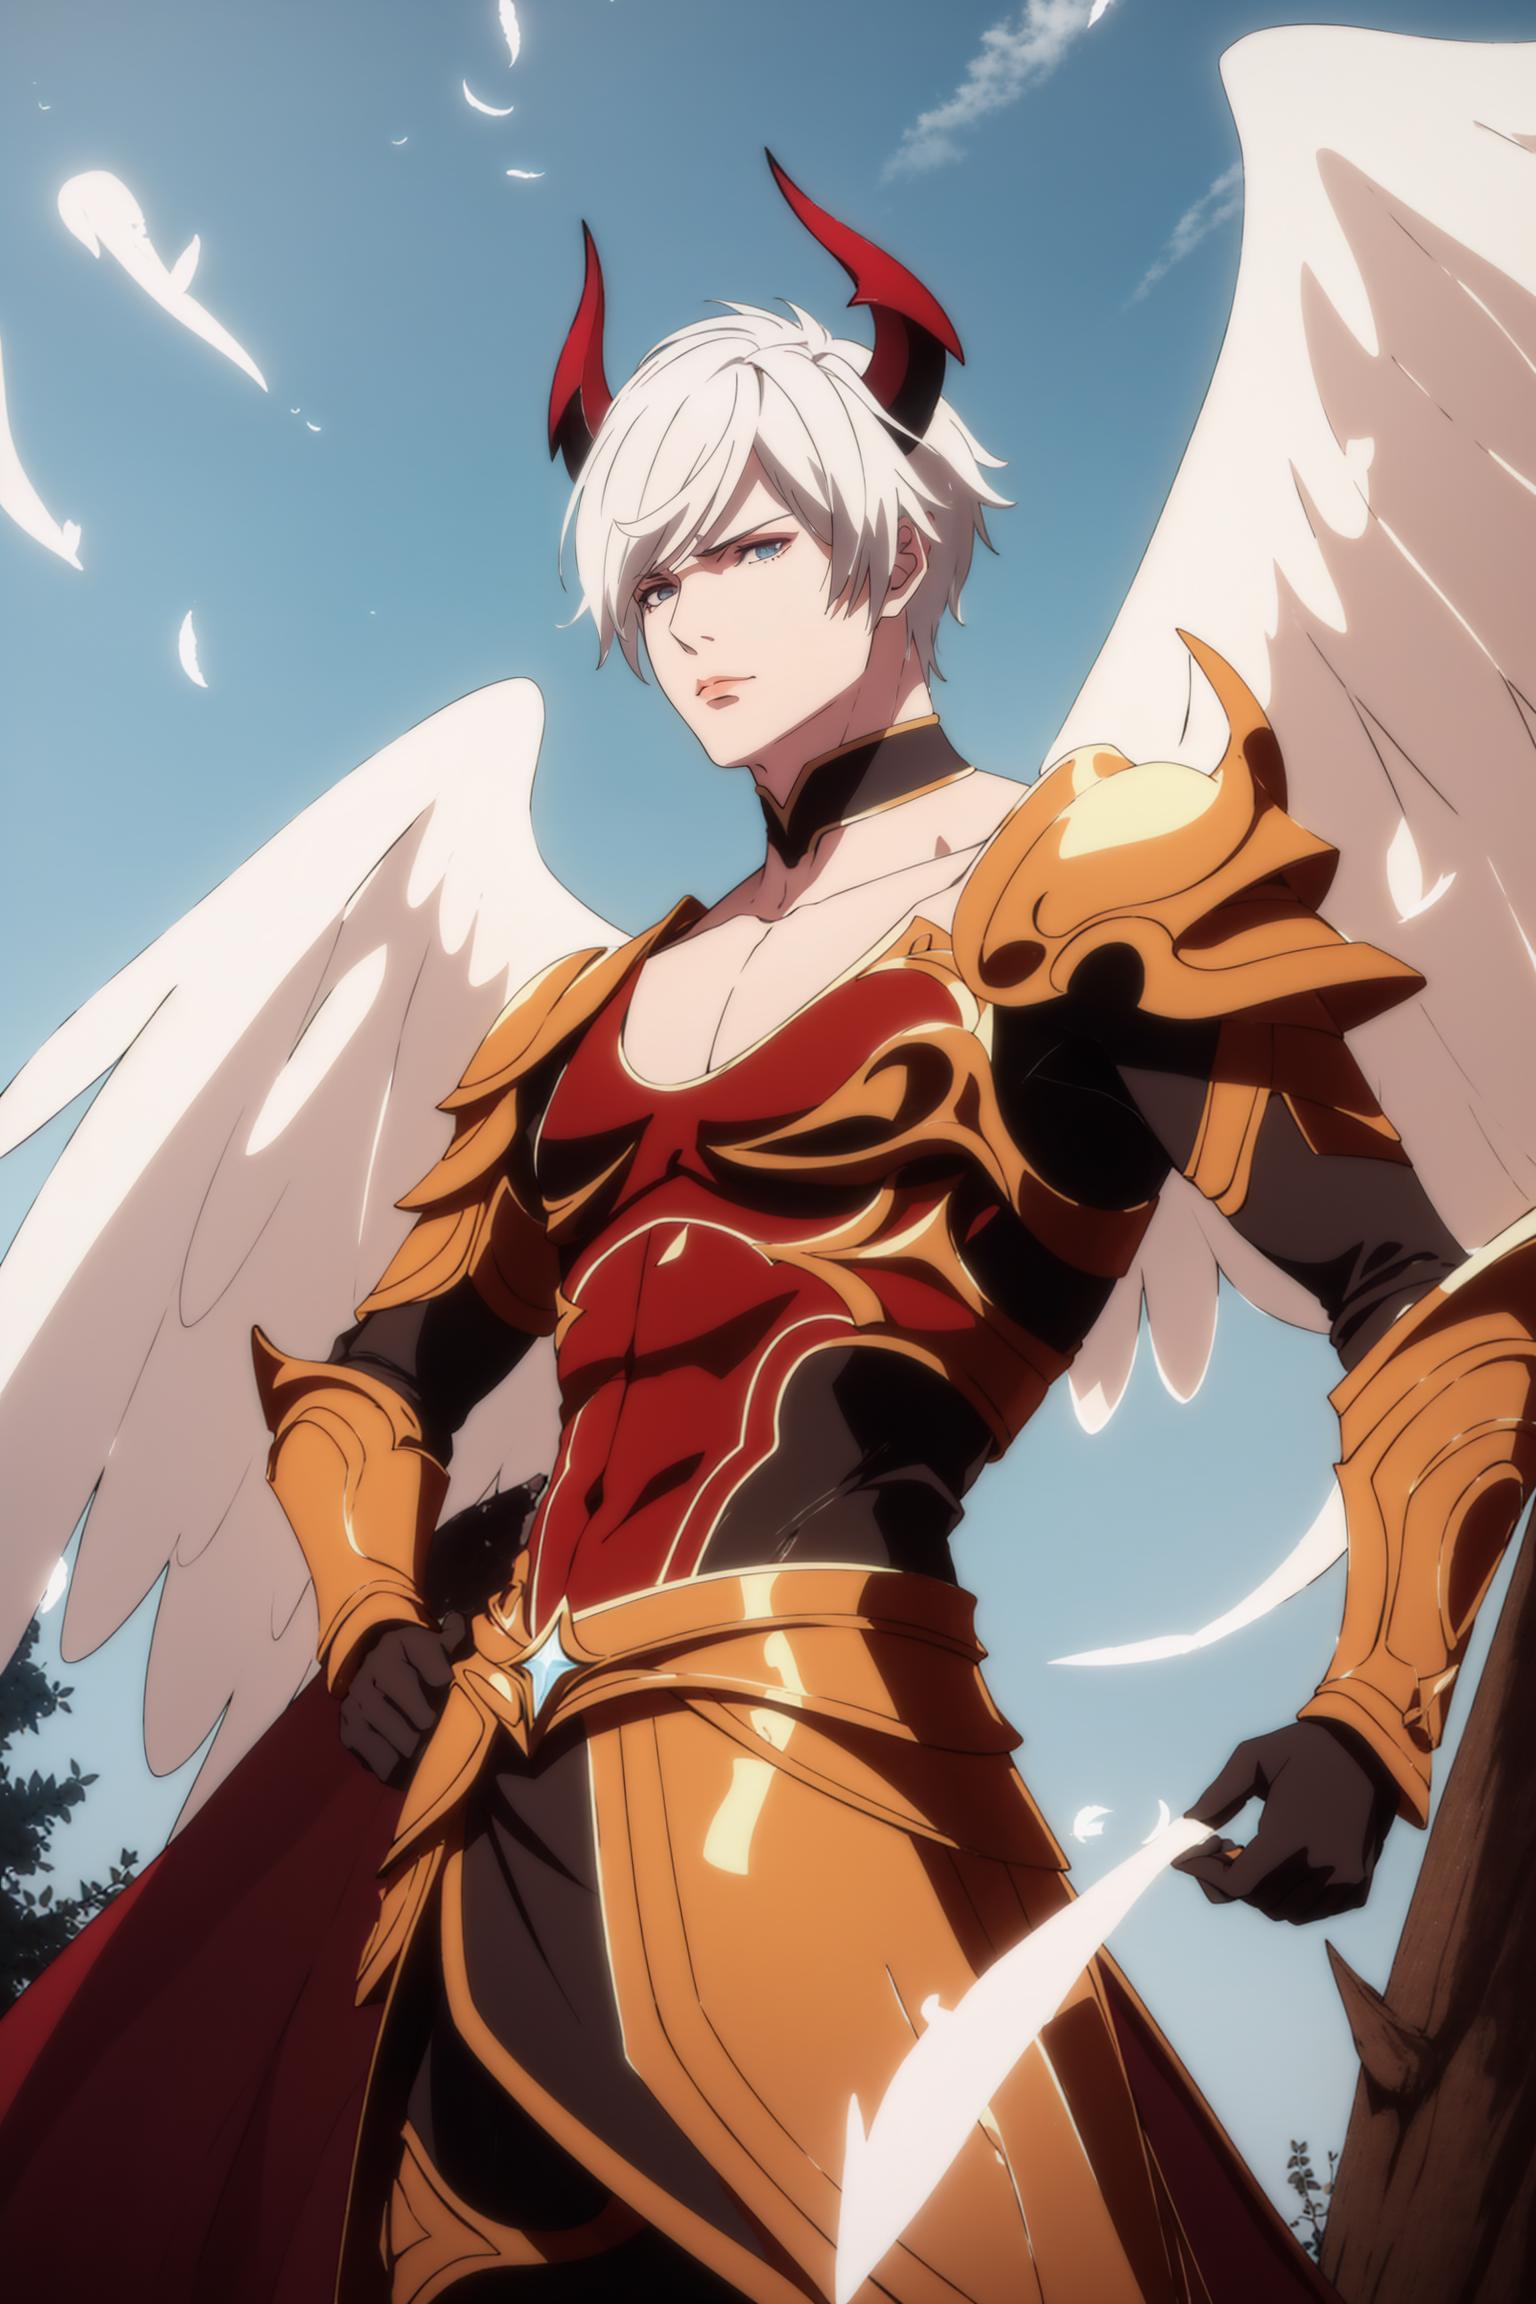 Which anime characters can defeat Lucifer? - Quora